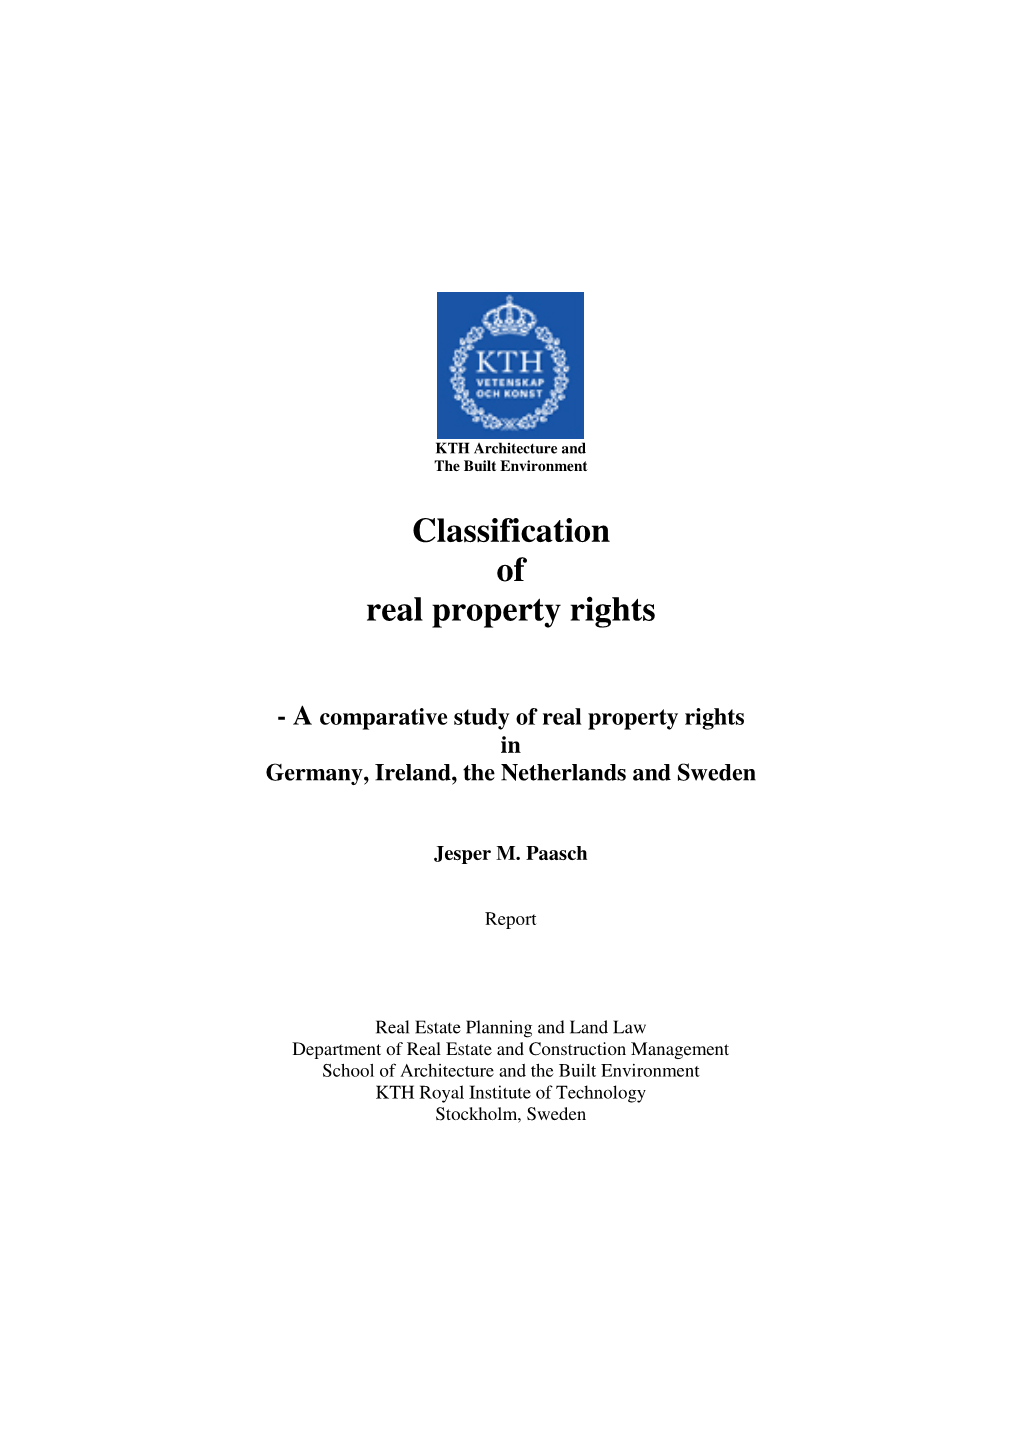 Classification of Real Property Rights